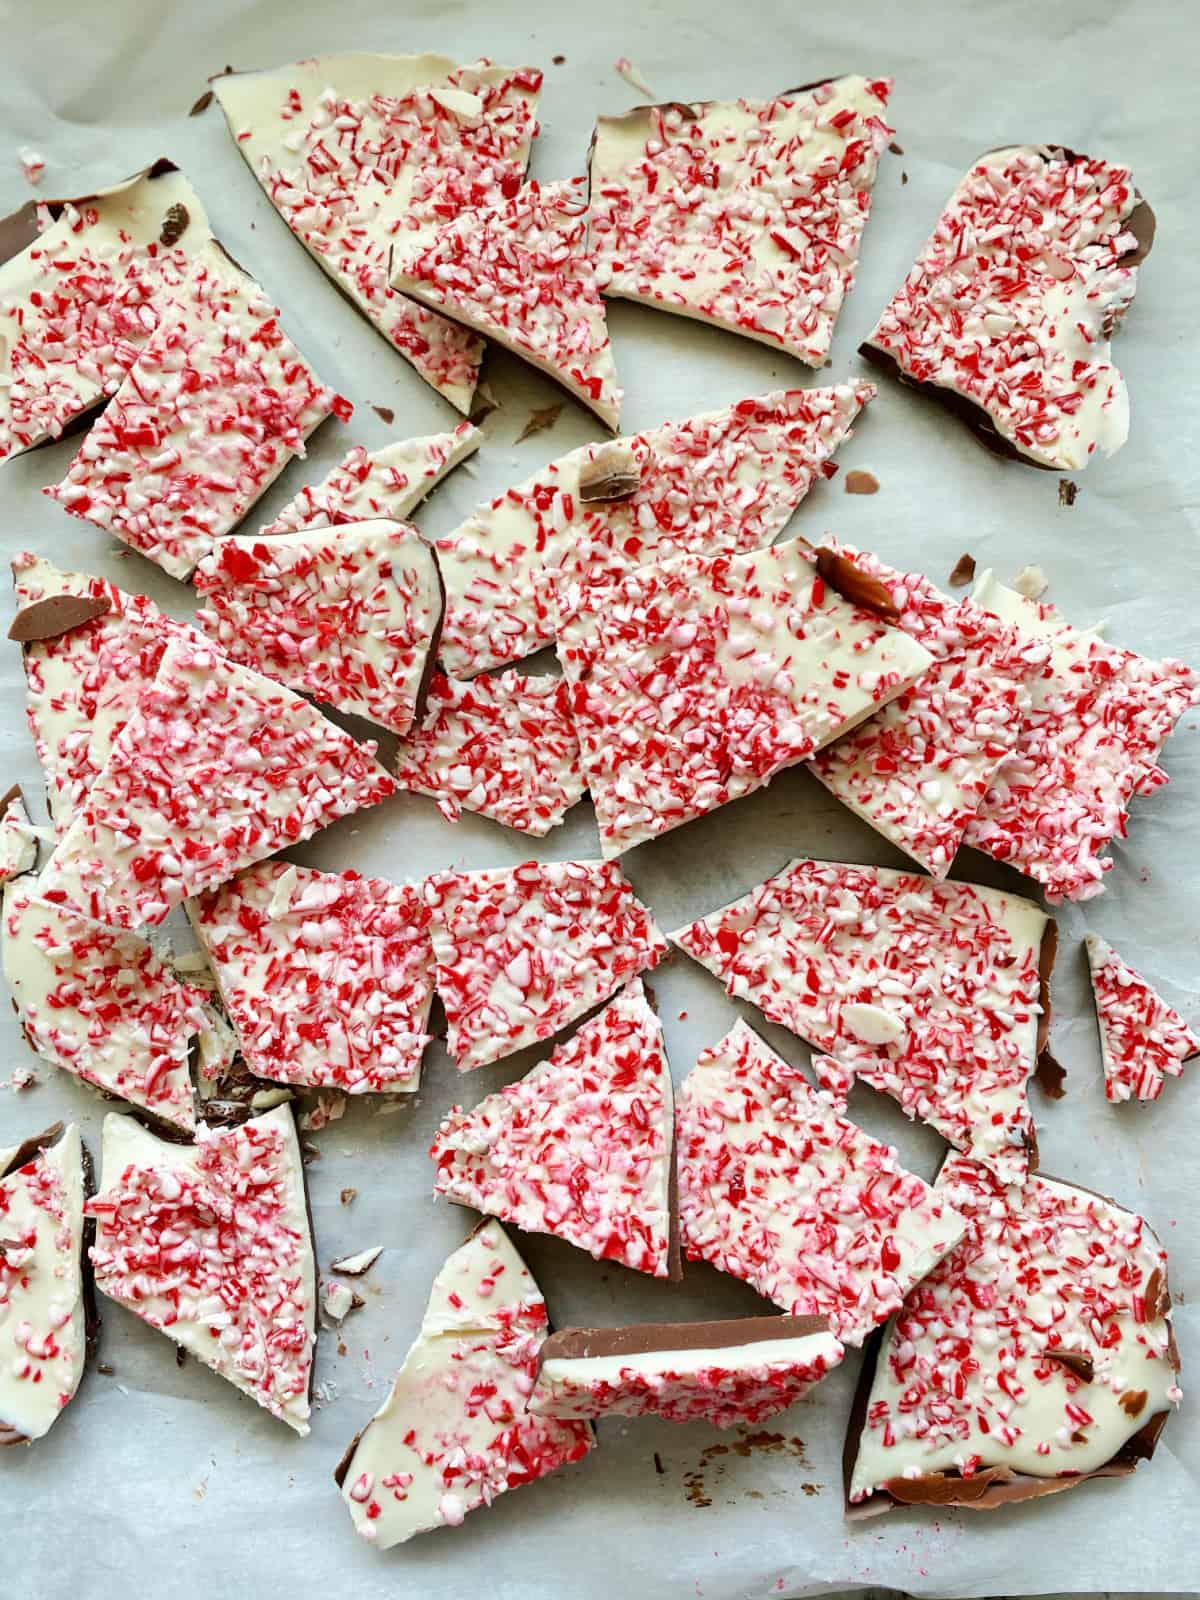 Top view of chopped Peppermint Bark in pieces on white parchment paper.